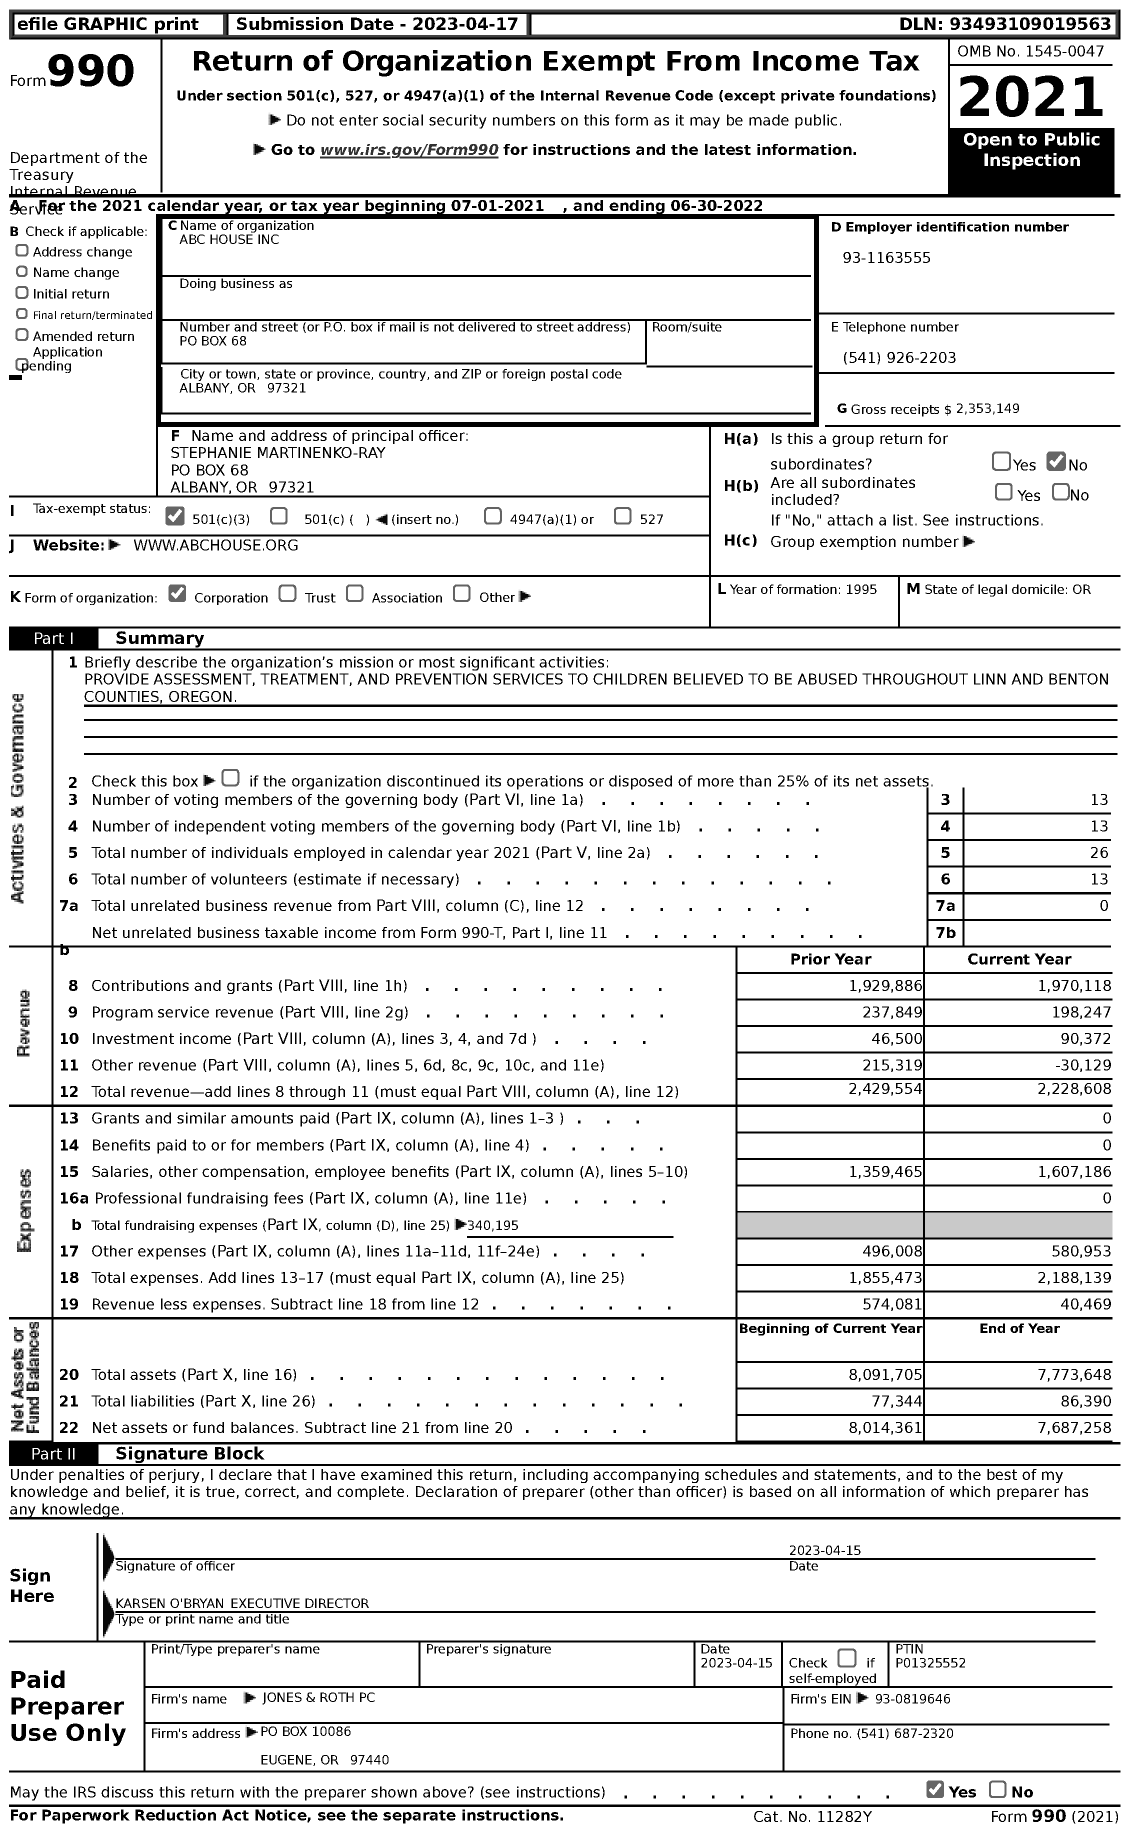 Image of first page of 2021 Form 990 for ABC House